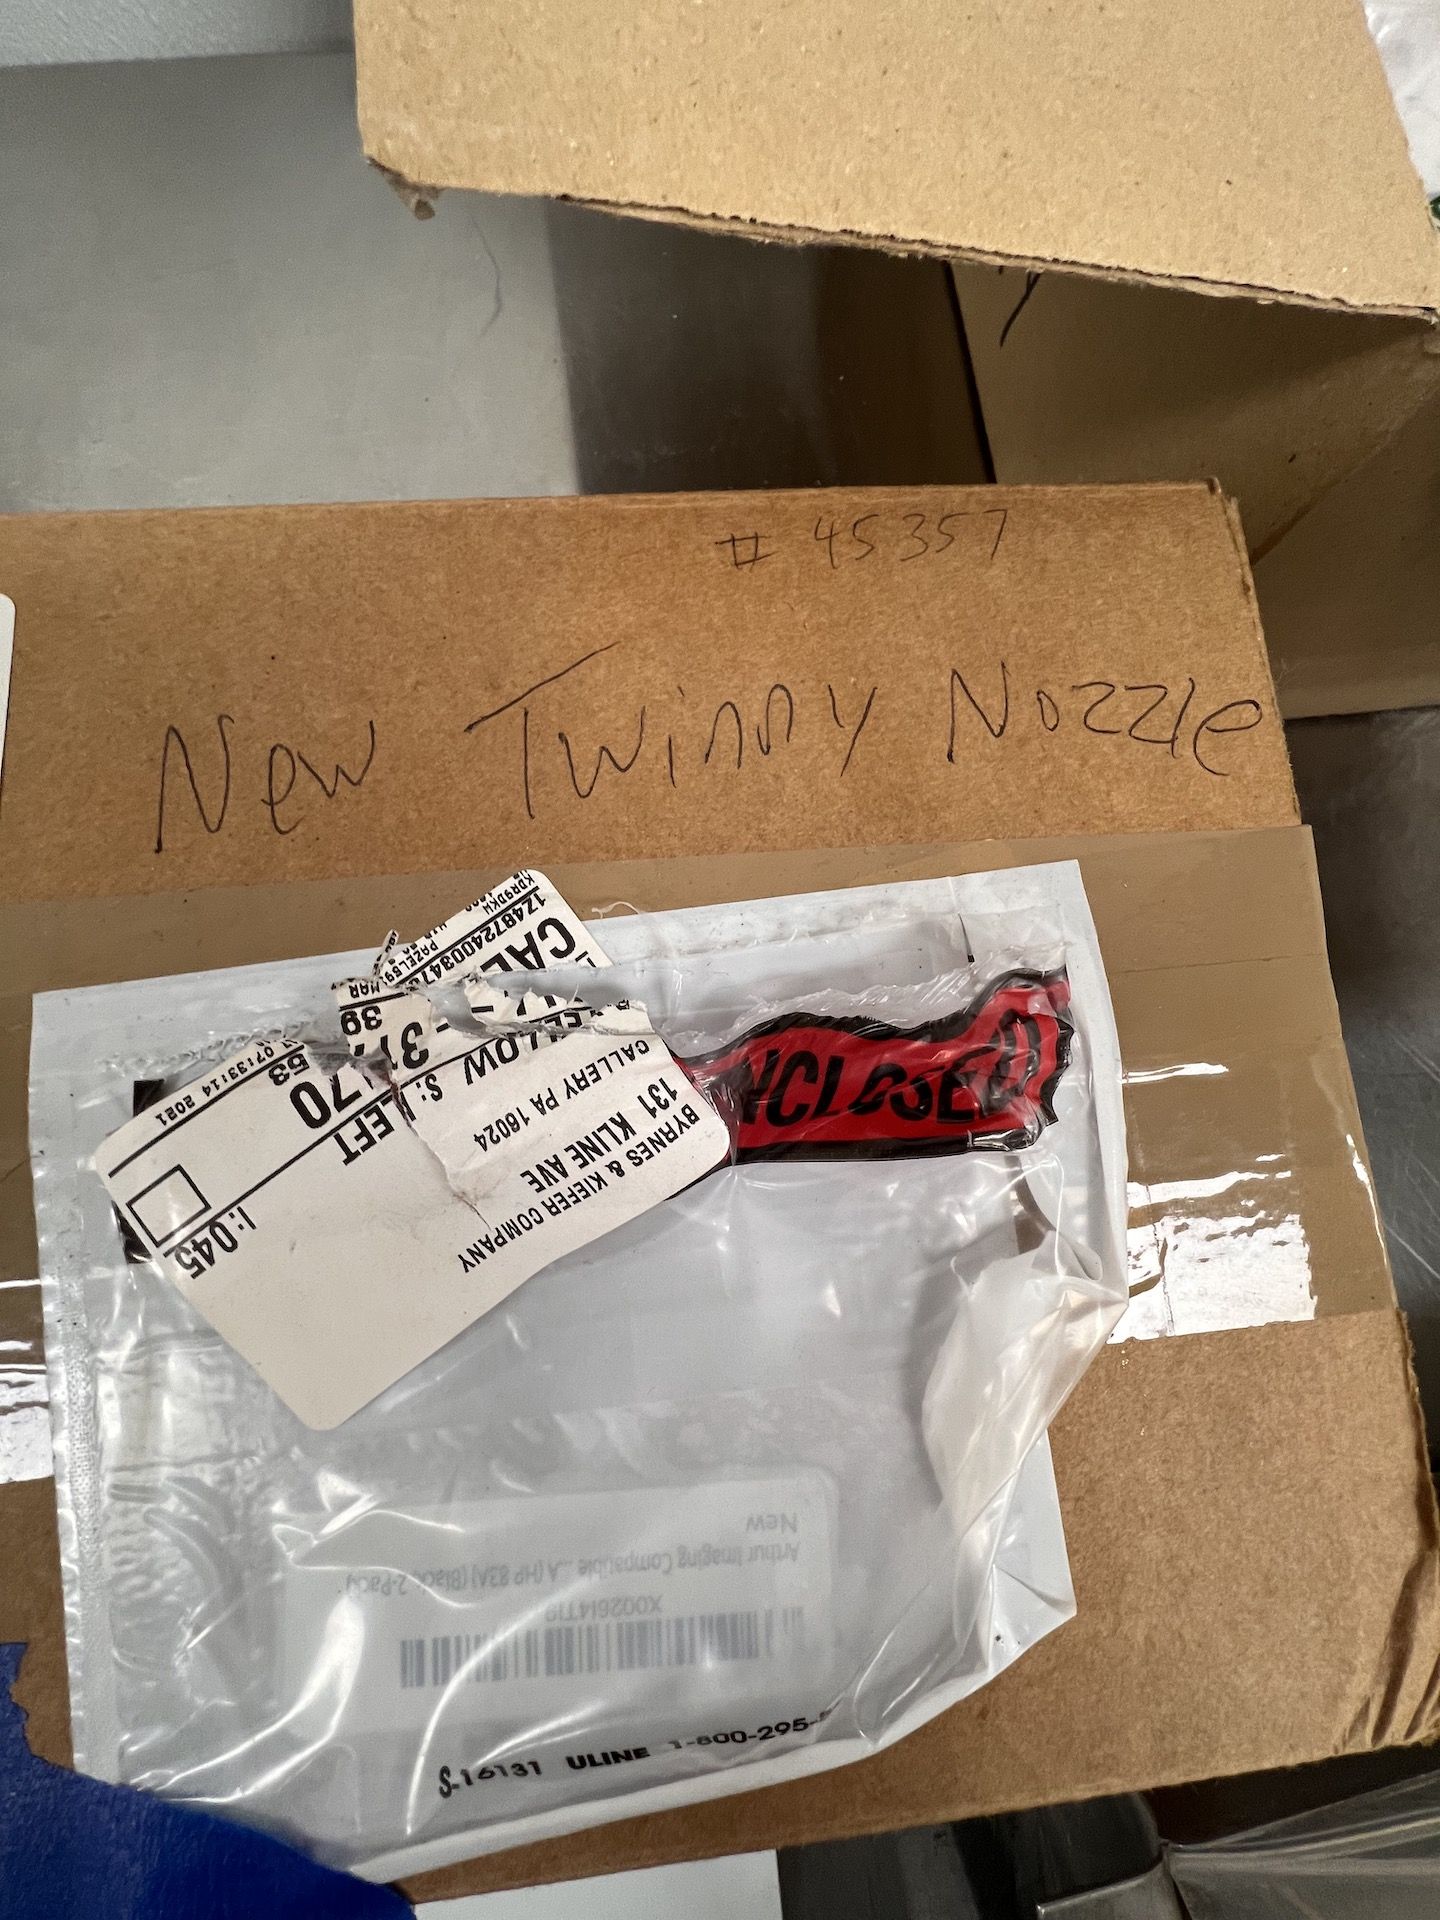 NEW IN BOX POLIN TWINY NOZZLES - Image 2 of 4